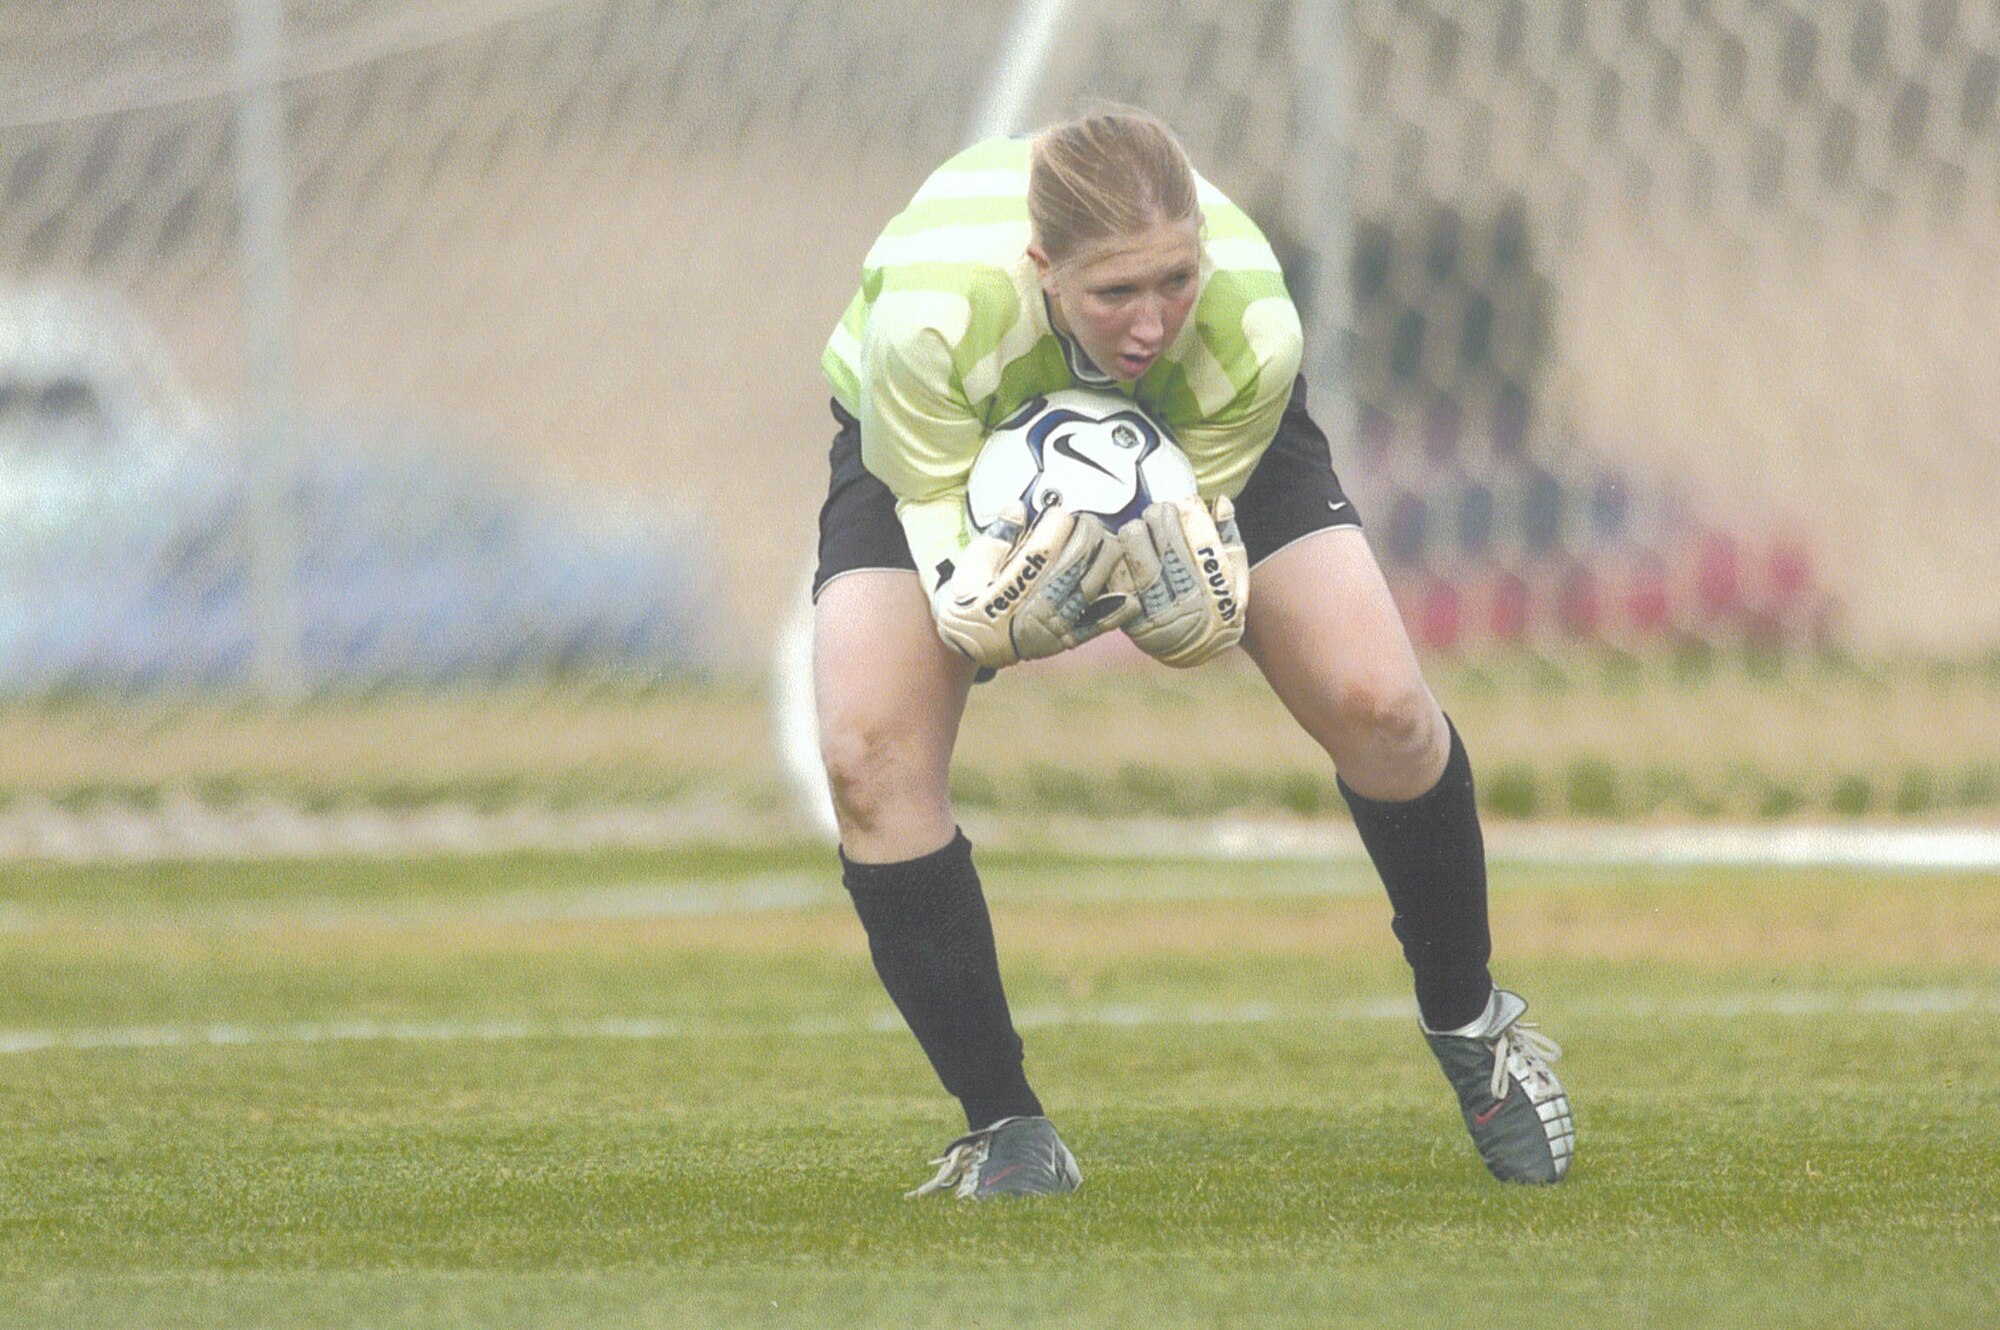 Maj. Erin Issler, an intelligence analyst for the Air Force Life Cycle Management Center, was goalkeeper for the Air Force Academy from 2005-2009.  She is now head coach of the Armed Forces women's soccer team.